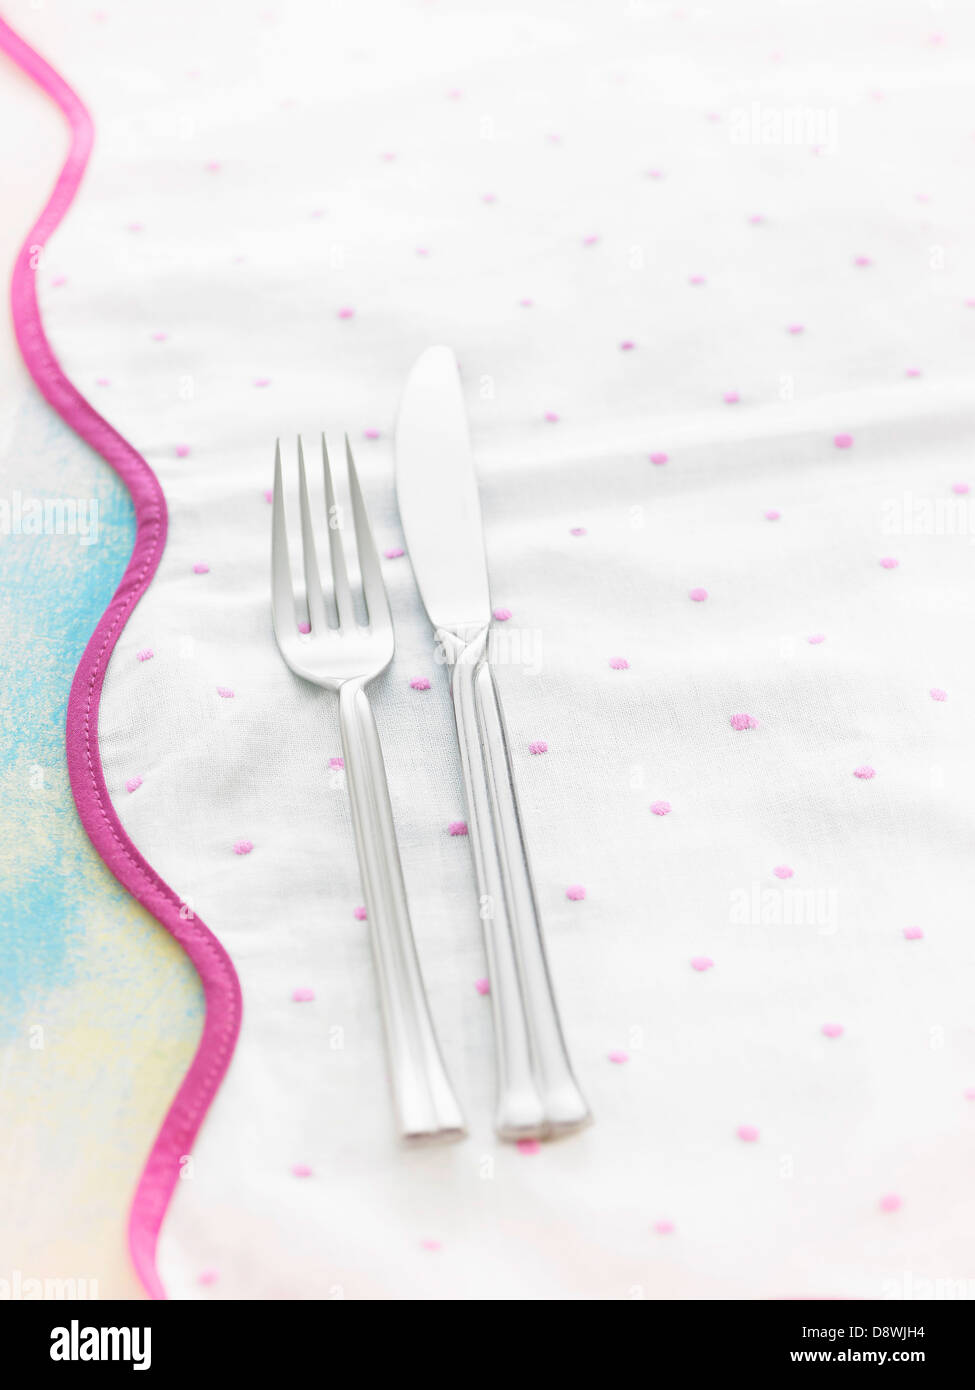 Knife and fork on a tablecloth Stock Photo